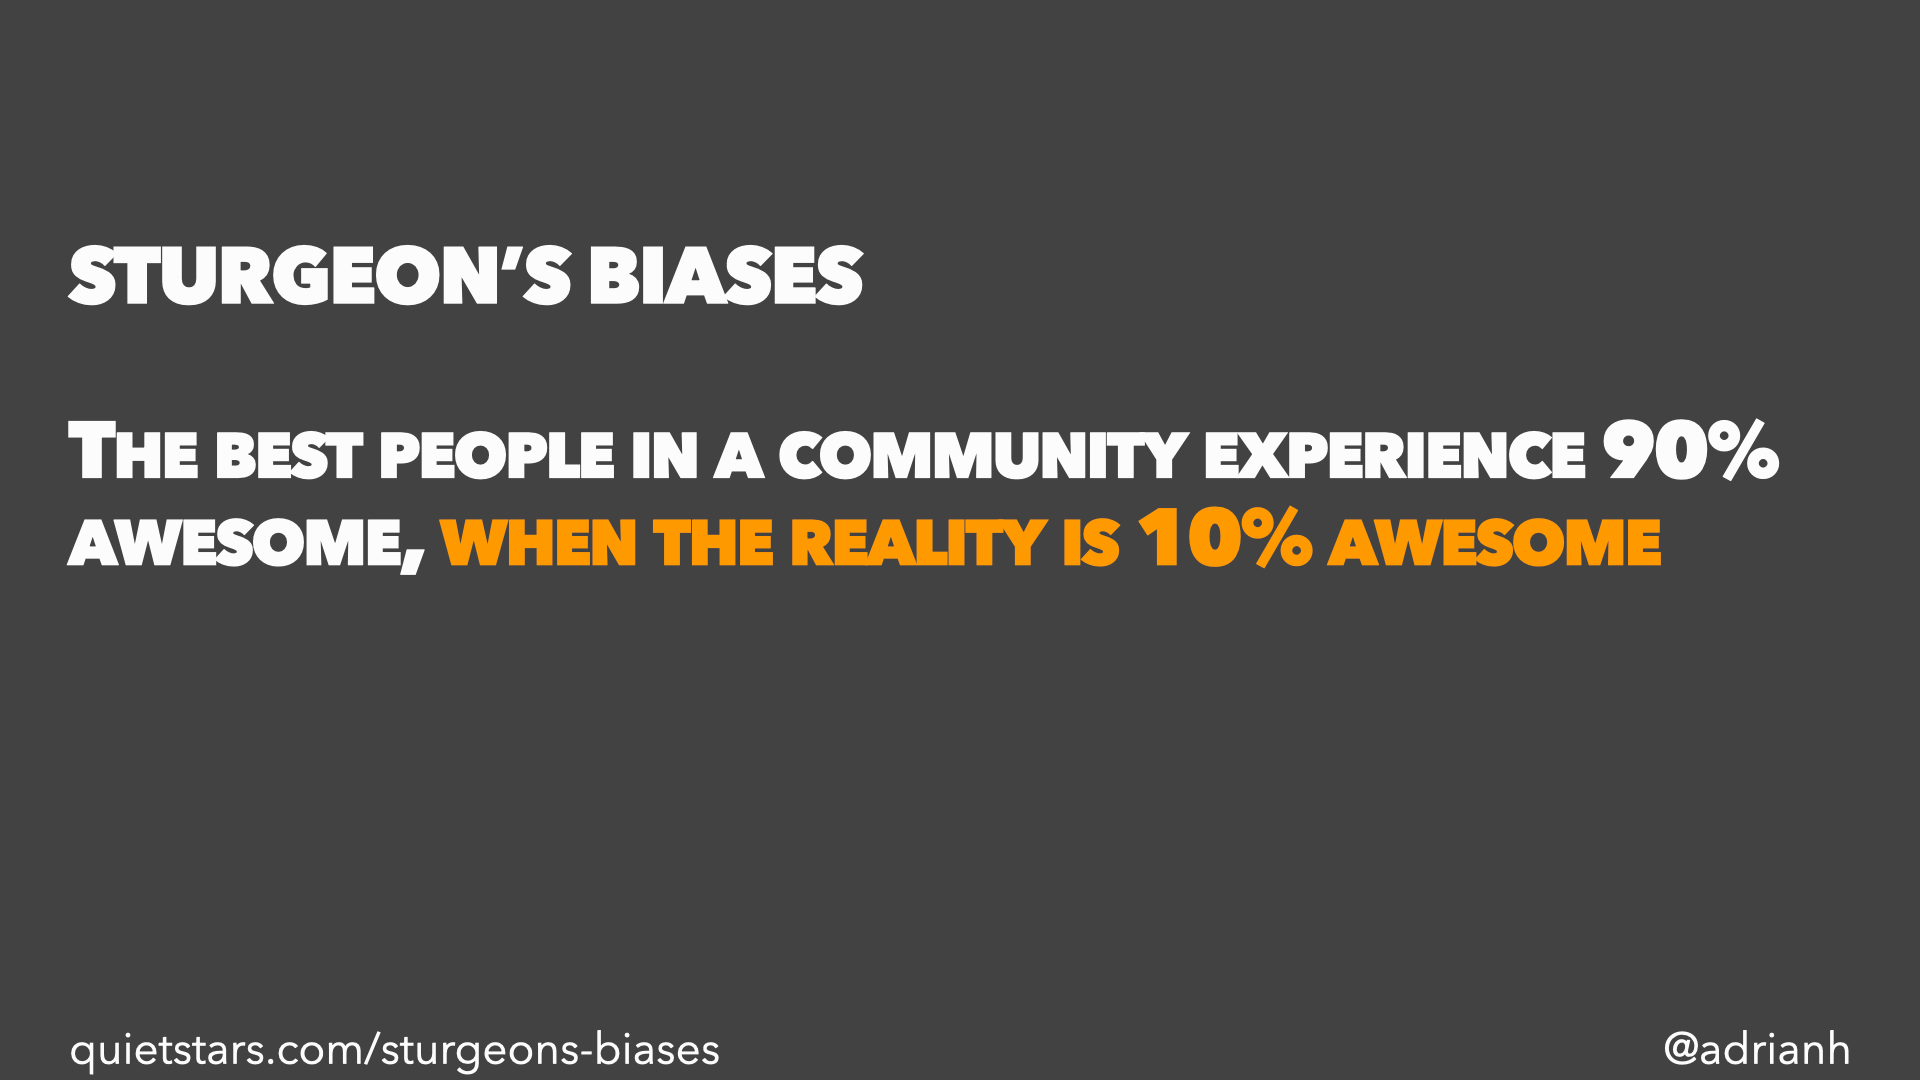 Sturgeon’s Biases: The best people in a community experience 90% awesome, when the reality is 10% awesome